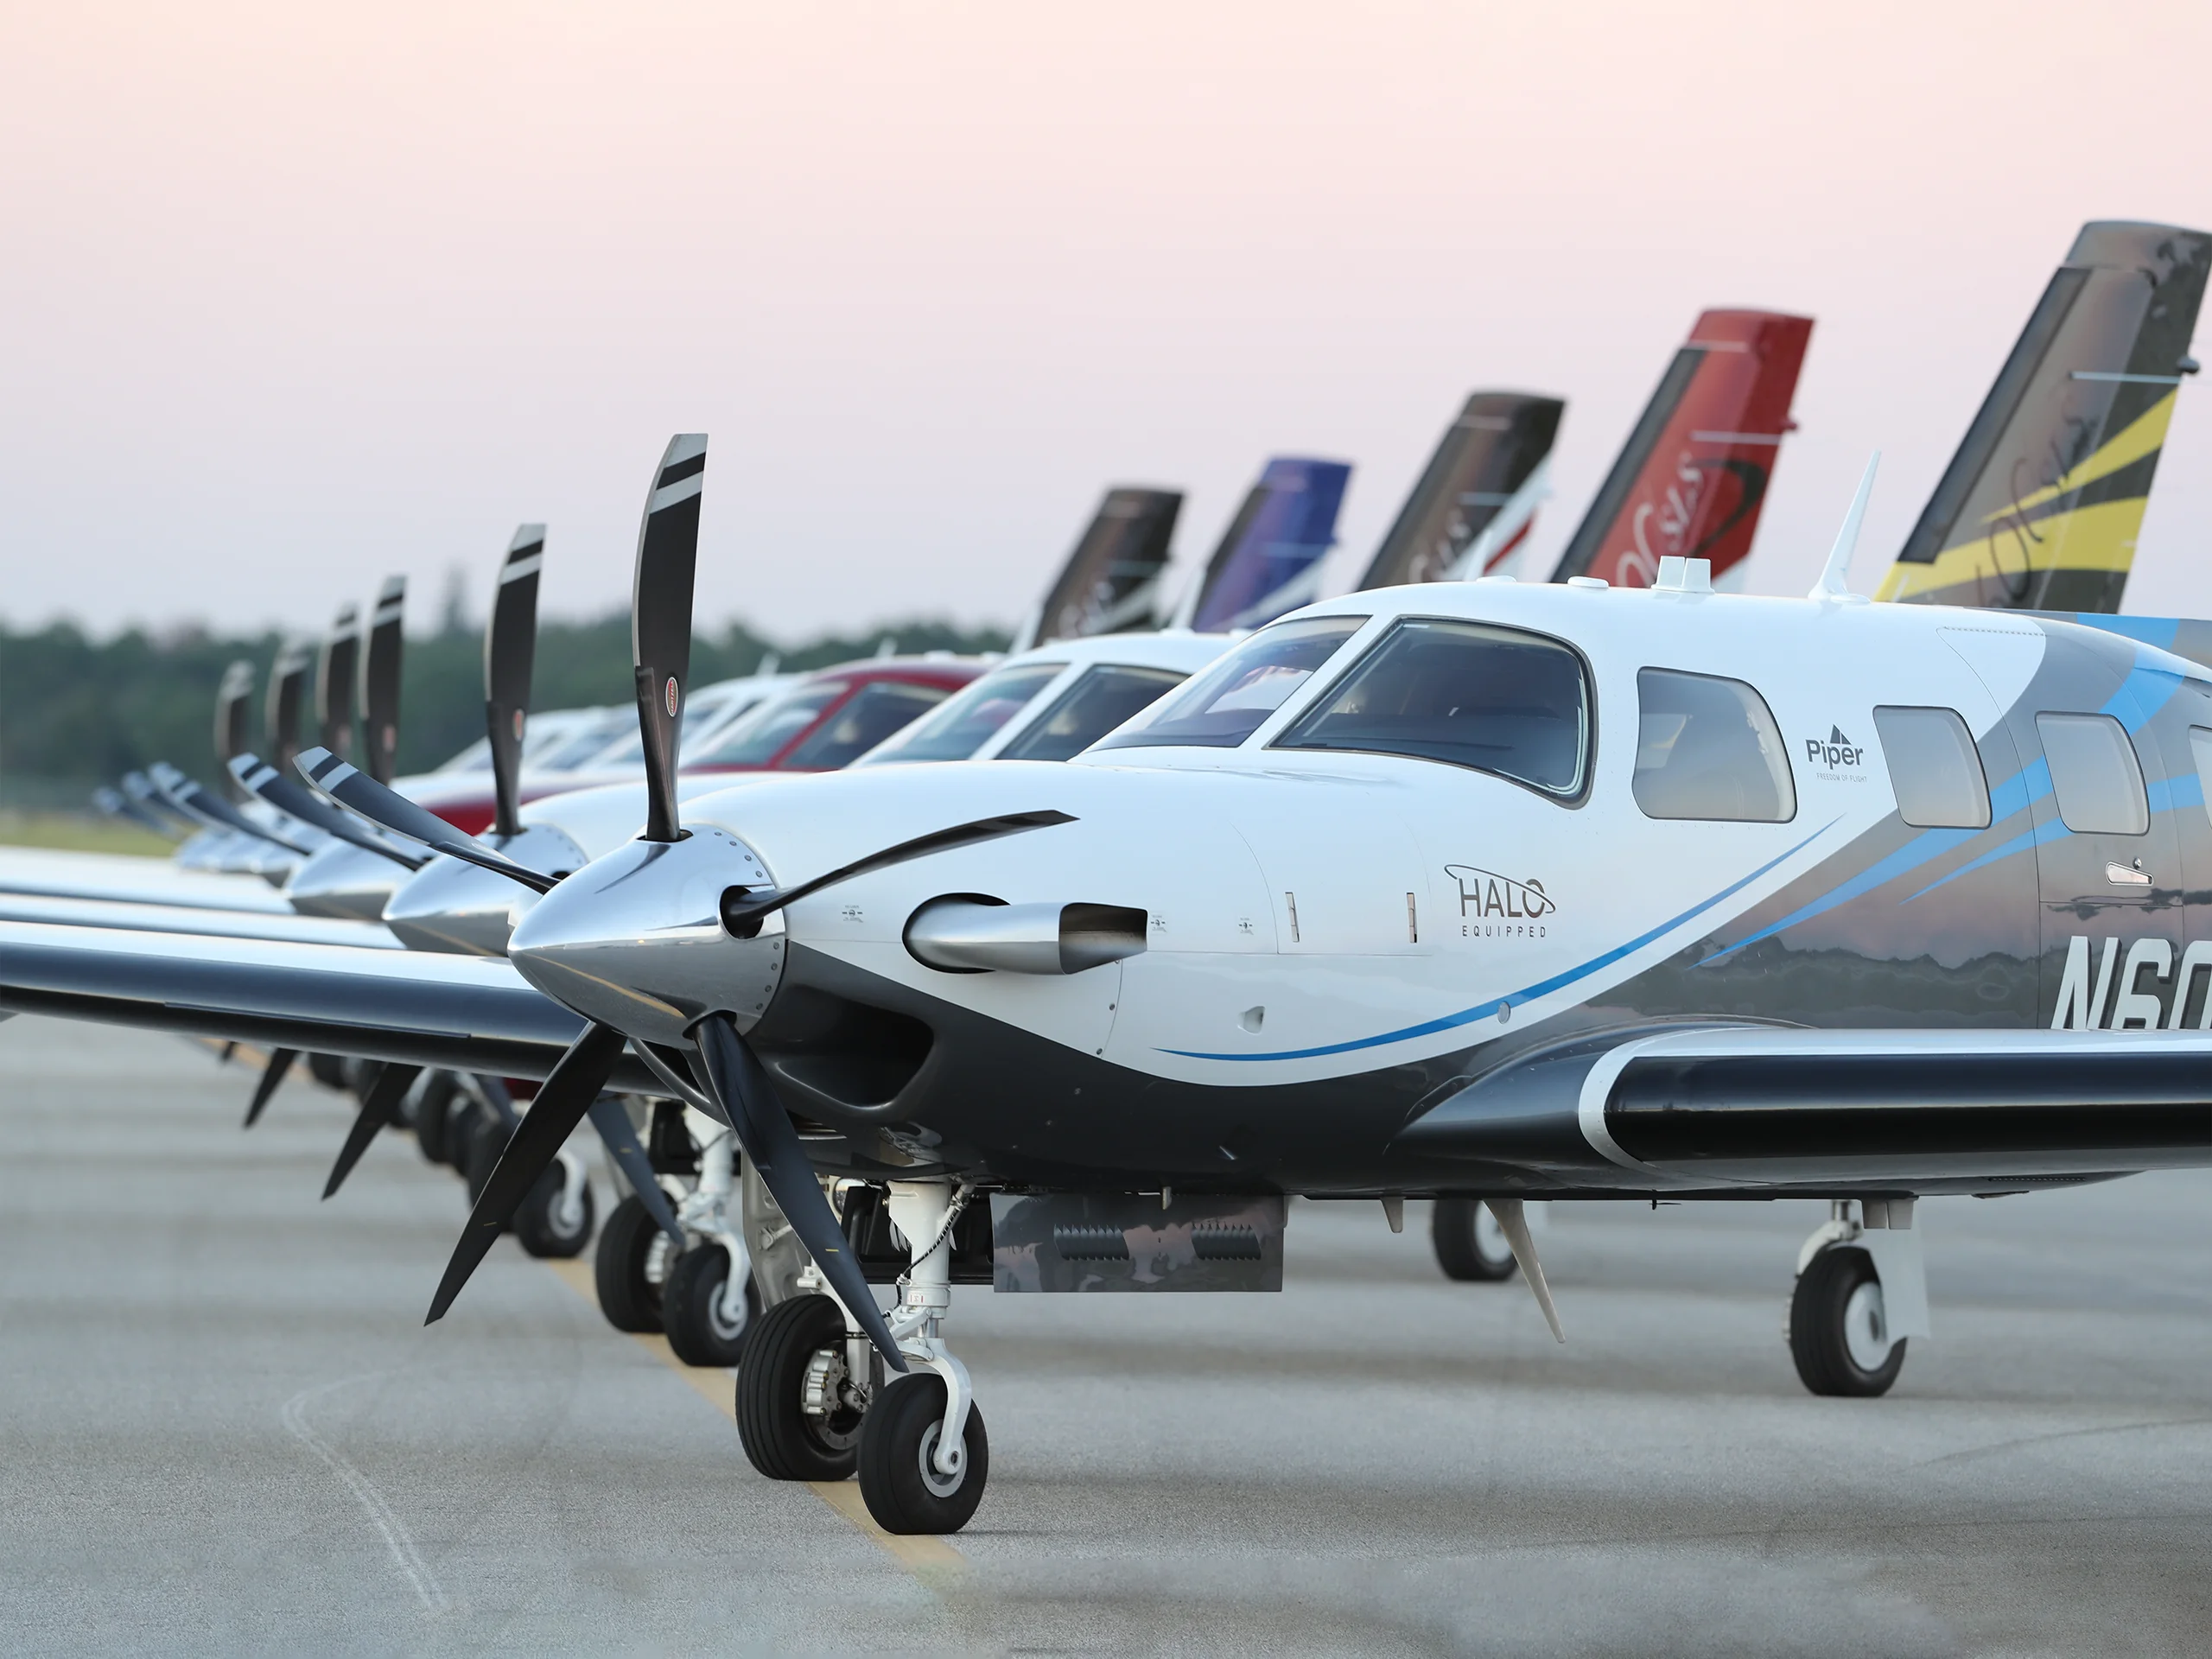 Line-Up of Piper M-Class Airplanes